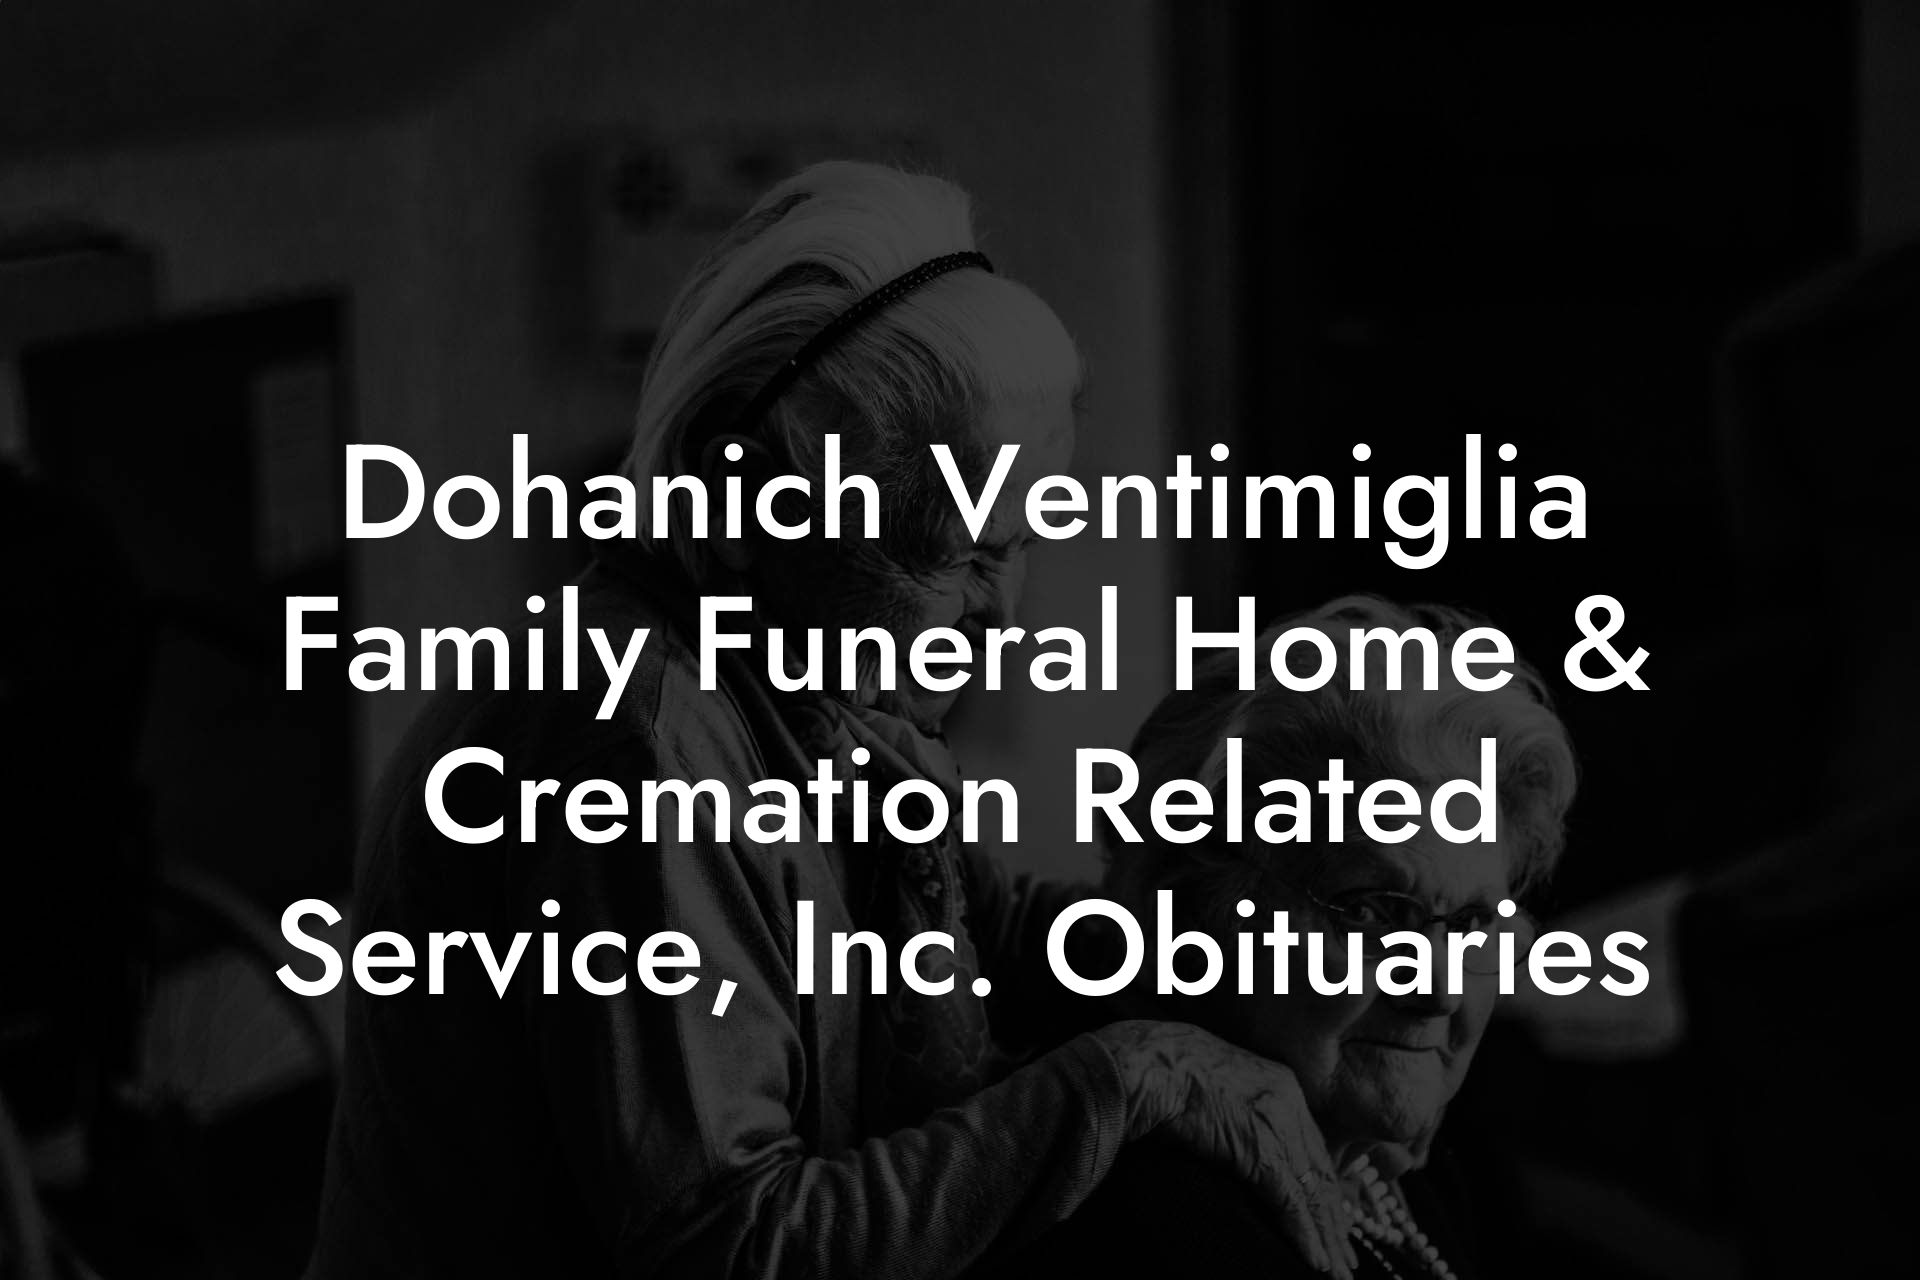 Dohanich Ventimiglia Family Funeral Home & Cremation Related Service, Inc. Obituaries